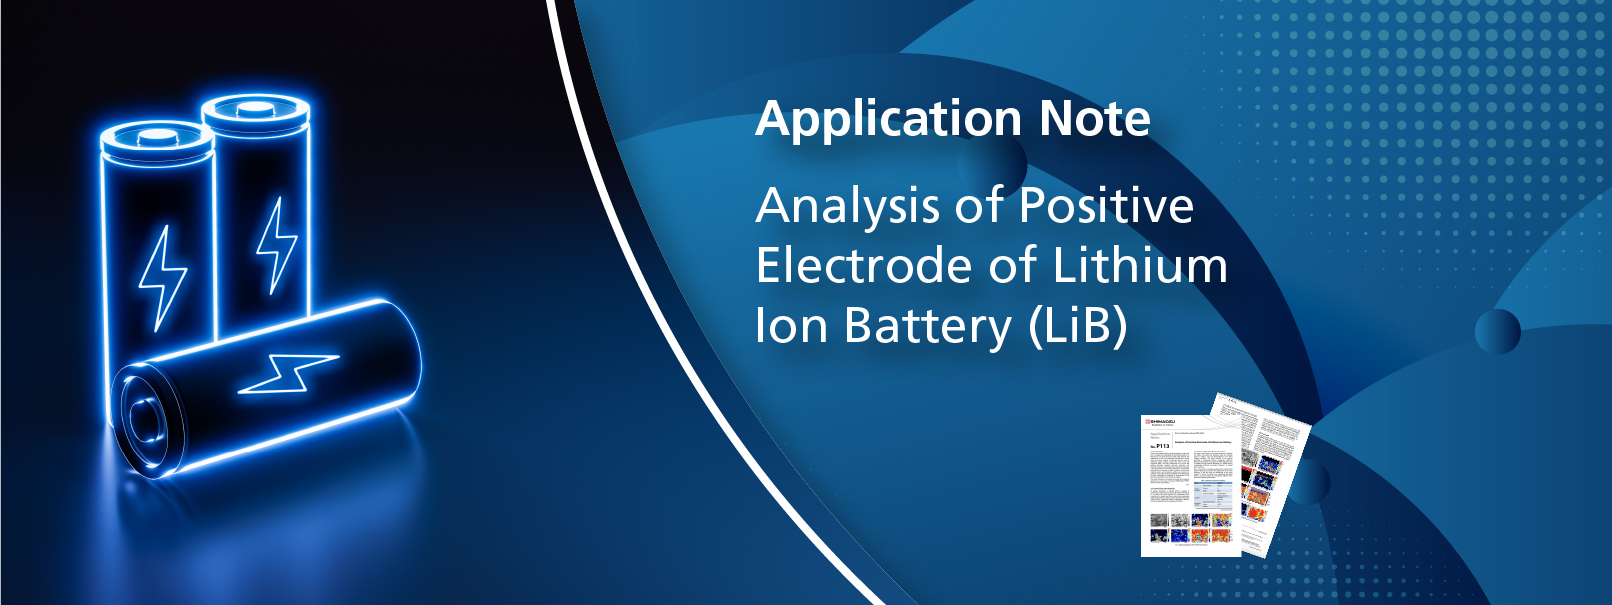 Analysis of Positive Electrode of Lithium Ion Battery (LiB)